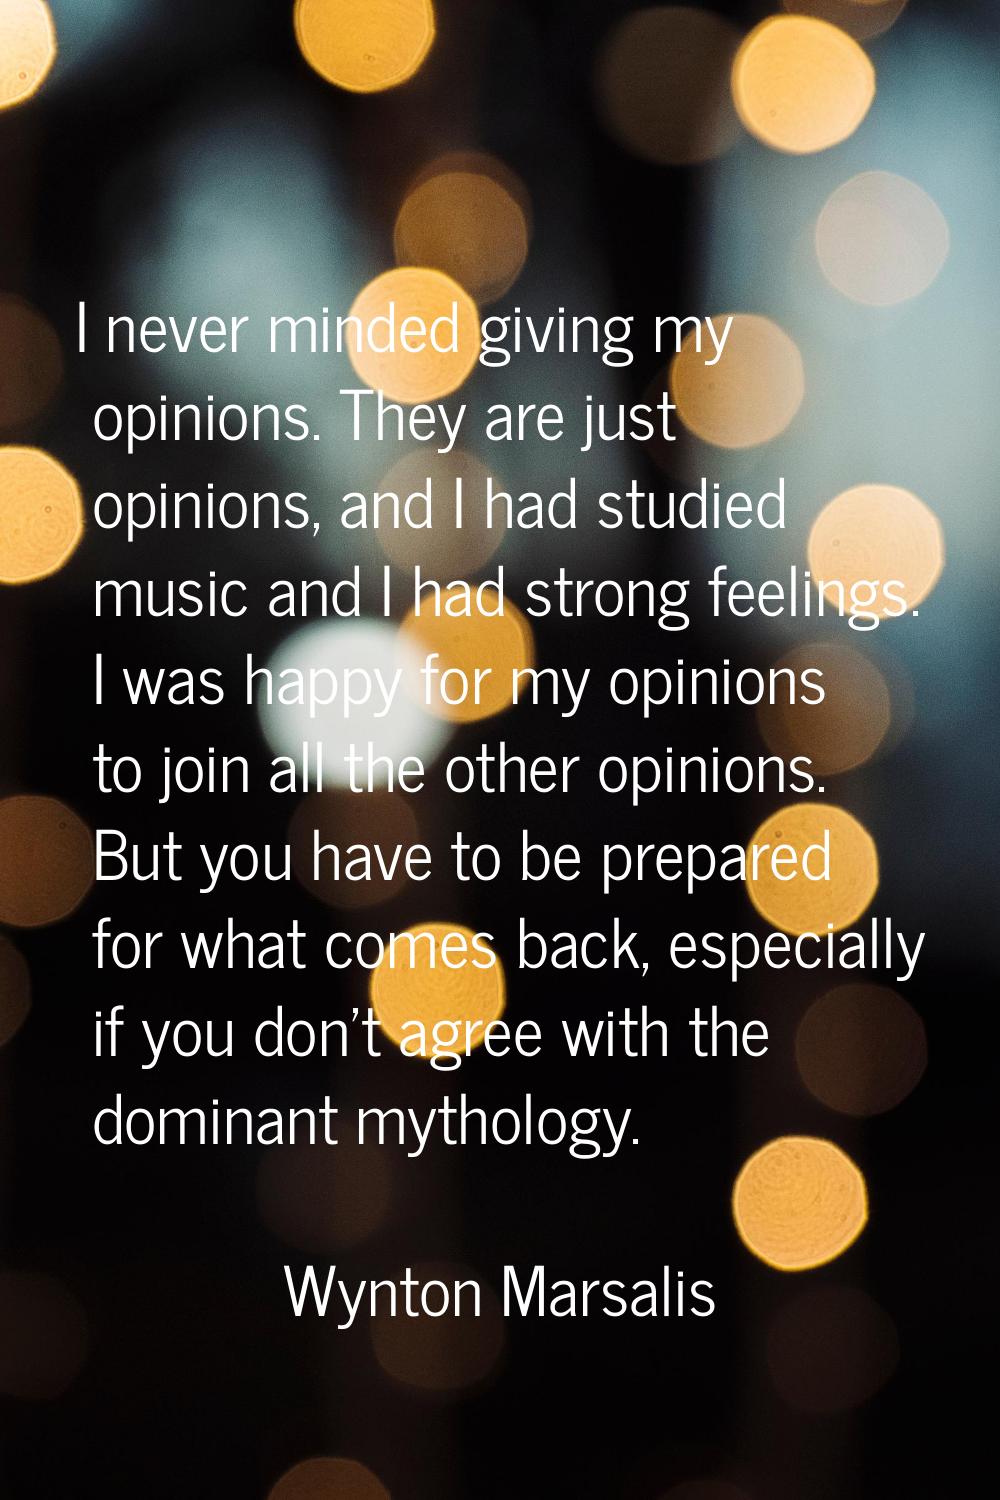 I never minded giving my opinions. They are just opinions, and I had studied music and I had strong